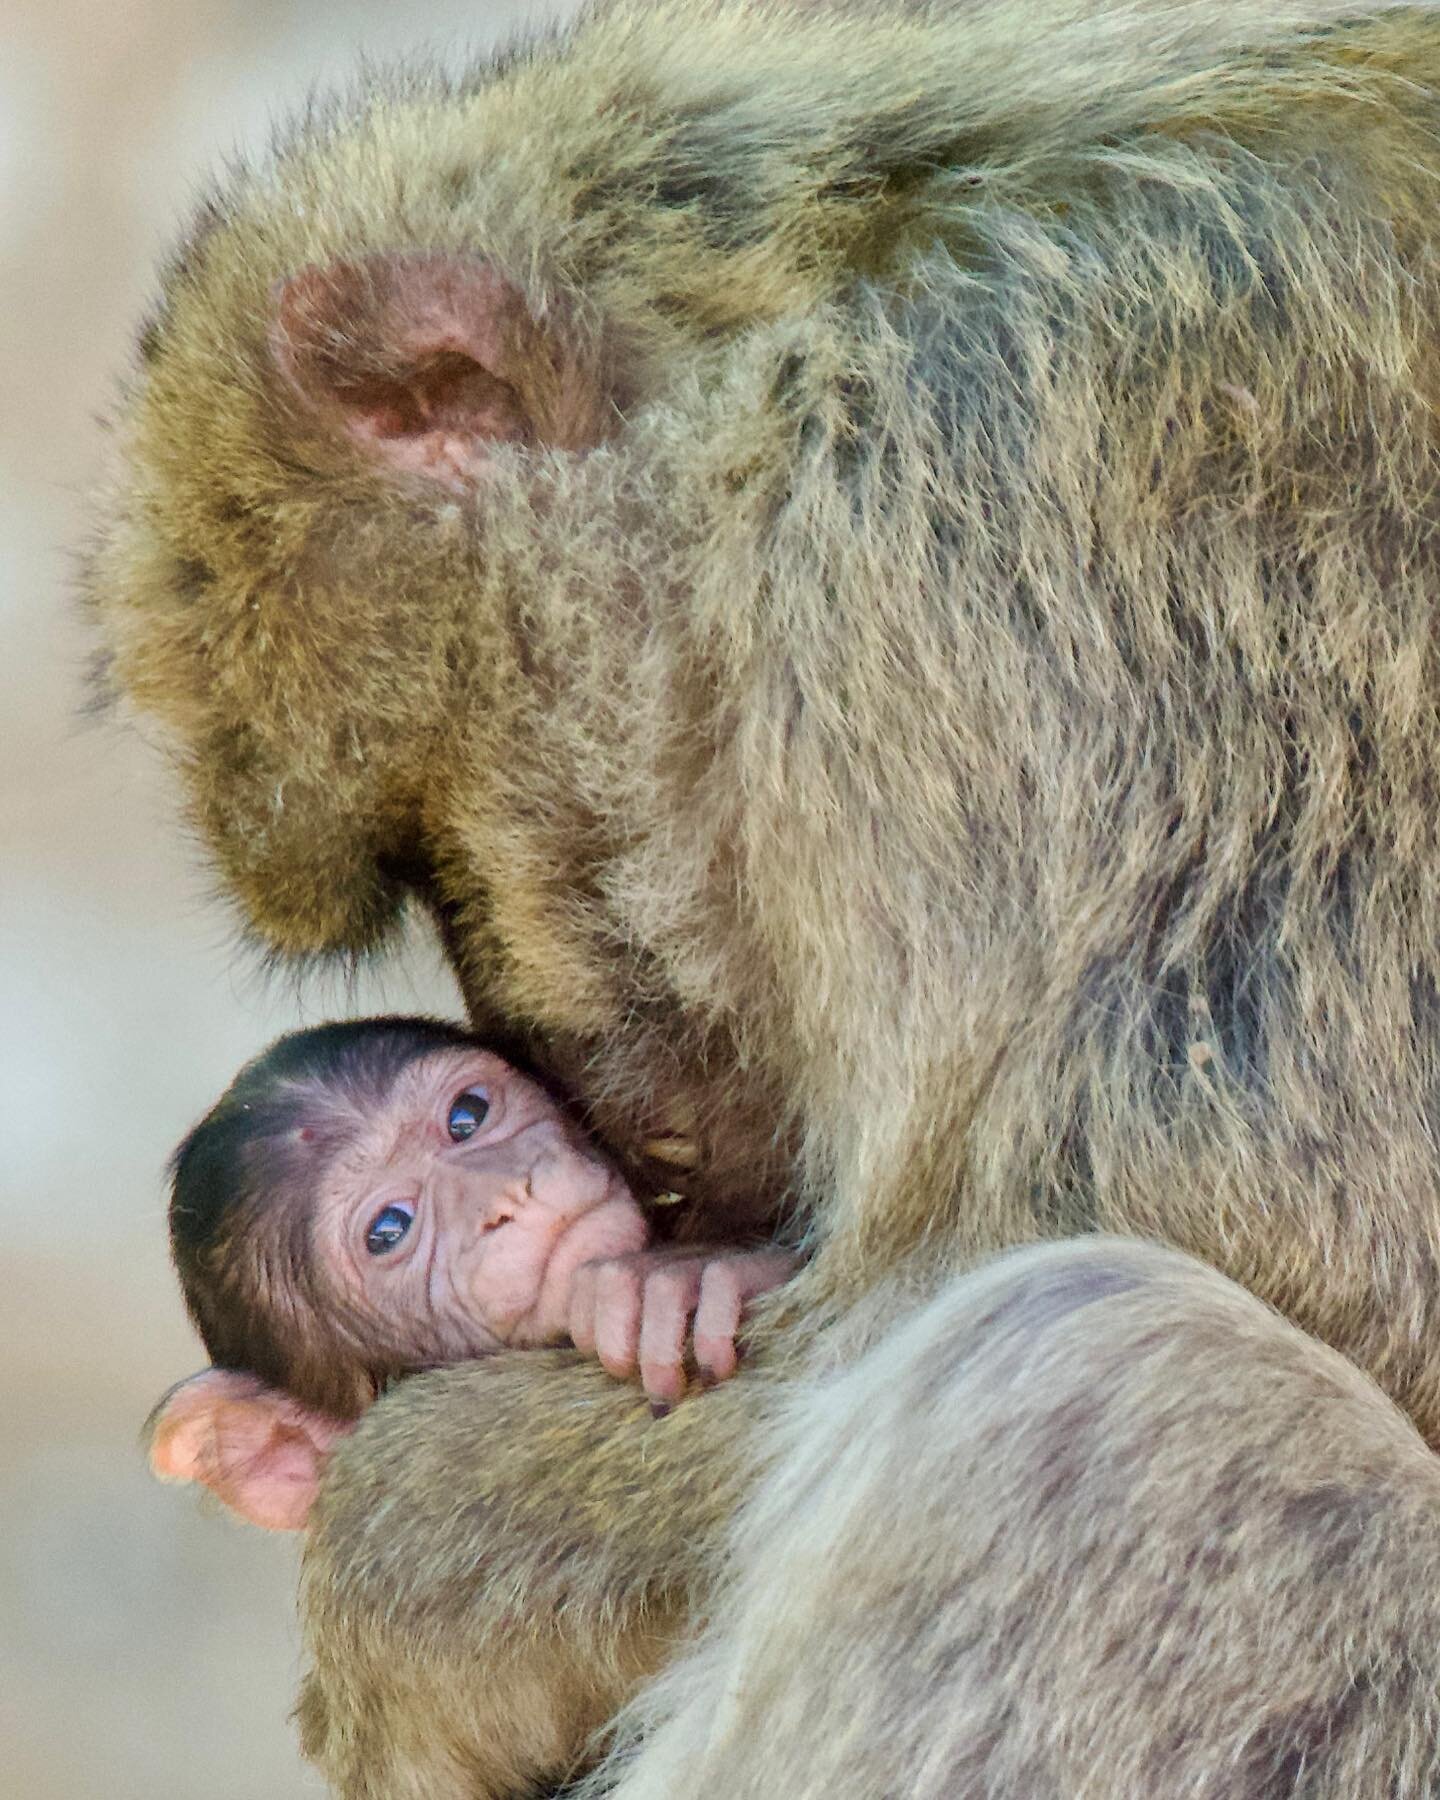 Troops of these incredibly friendly Barbary Macaques live in the cedar forest surrounding the Moroccan towns of #Ifrane and #Azrou.

I was lucky enough to get these images (made from a respectful distance) on my last visit. This newborn monkey is jus